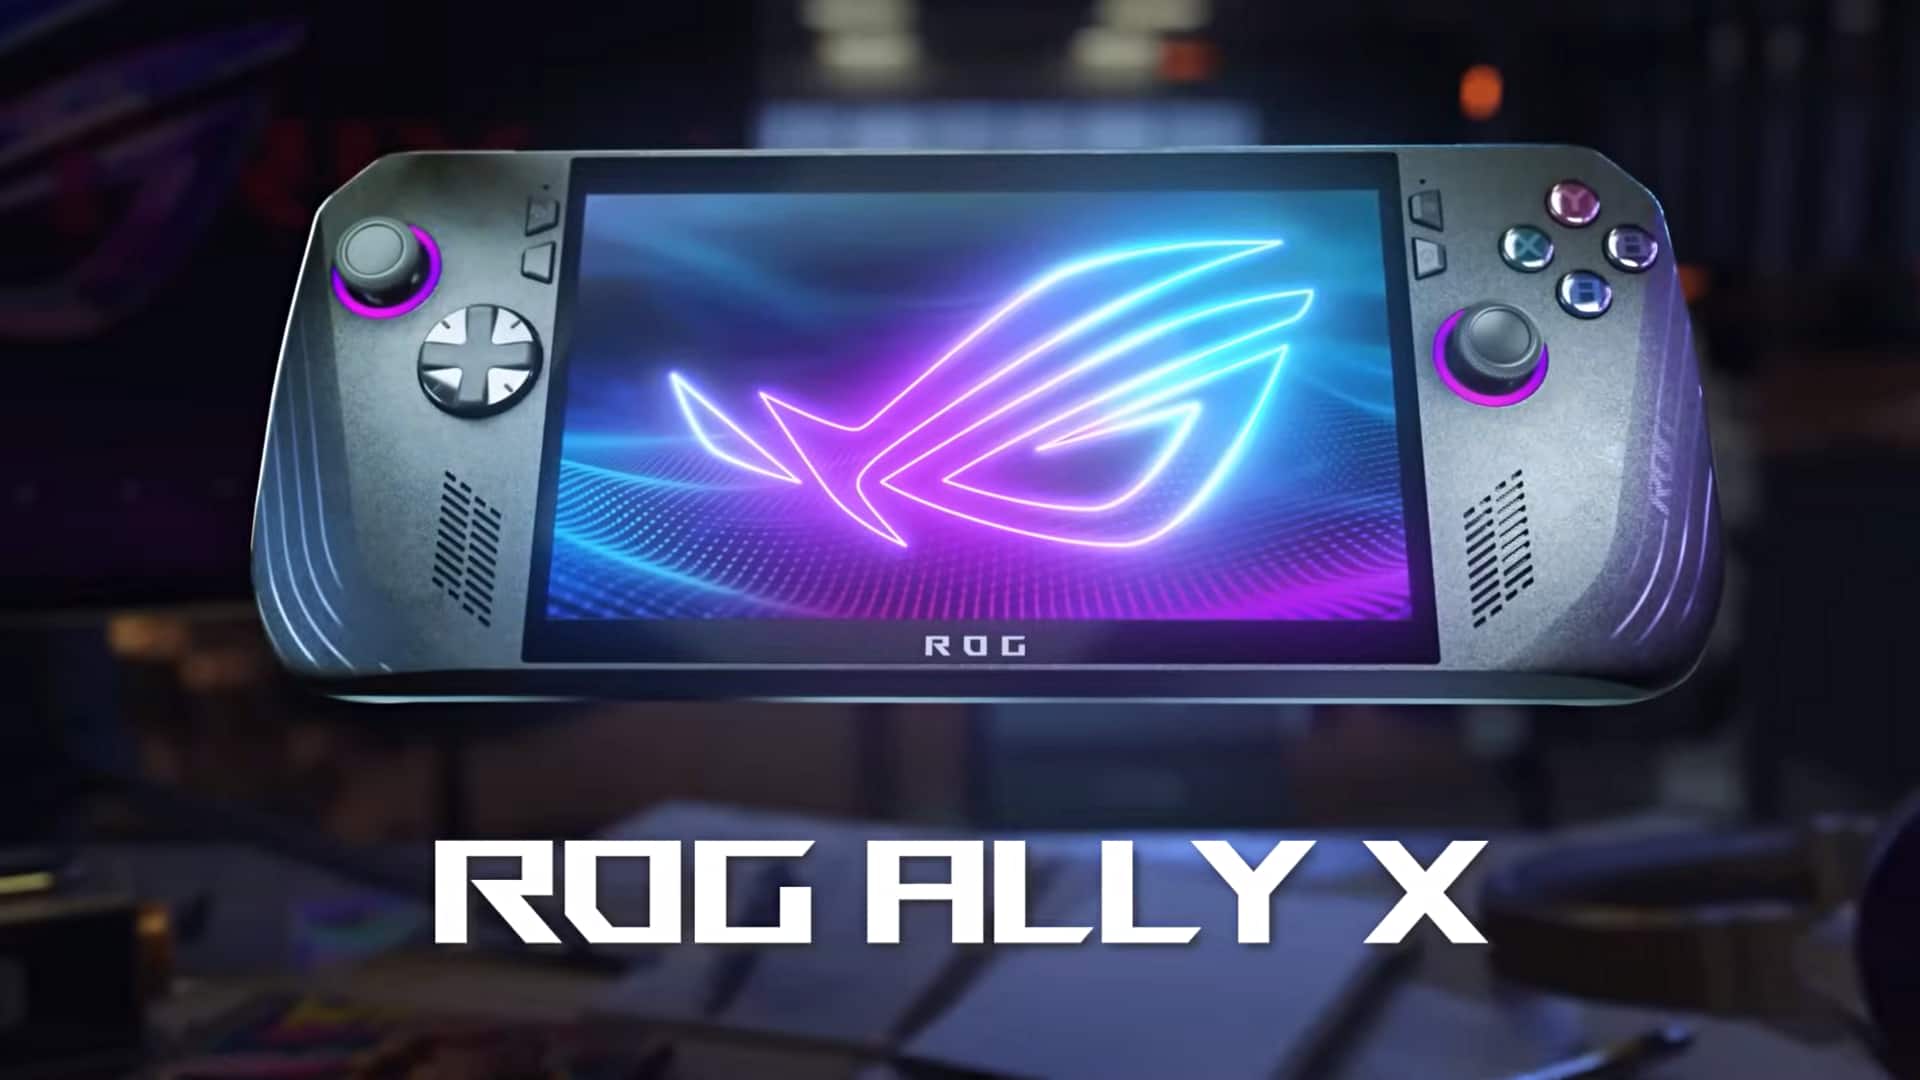 ASUS ROG Ally X launched with upgraded hardware, improved cooling